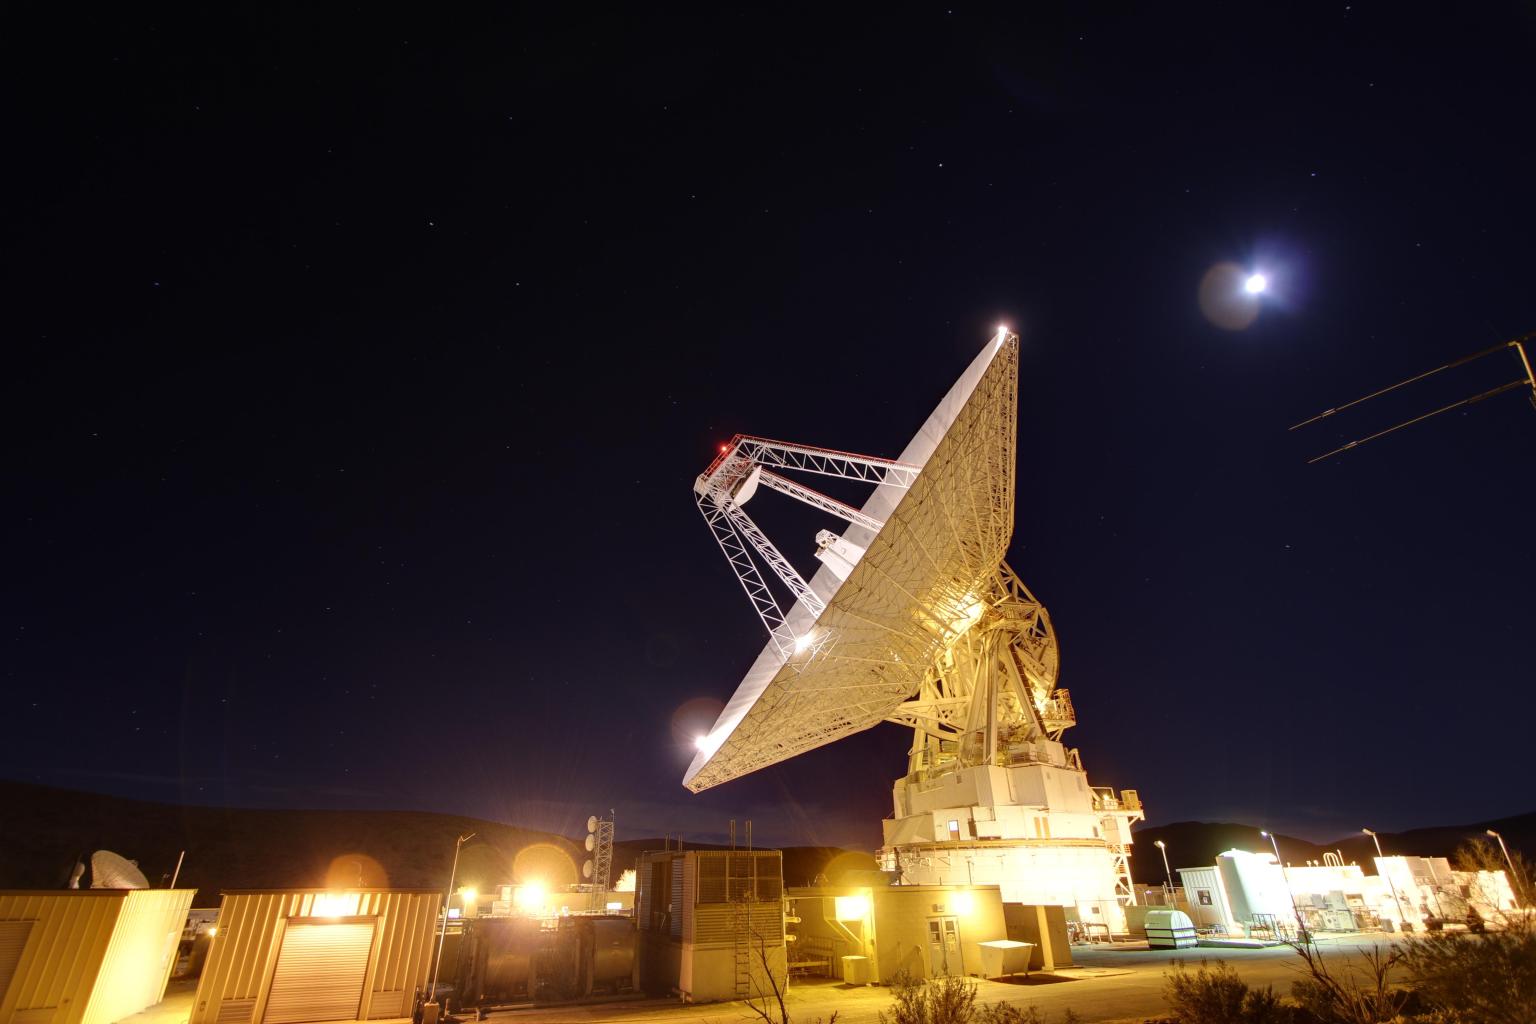 A 70-meter antenna lights up the night sky at the Goldstone Deep Space Communications Complex near Barstow, California. The Moon brightly shines behind the giant antenna.